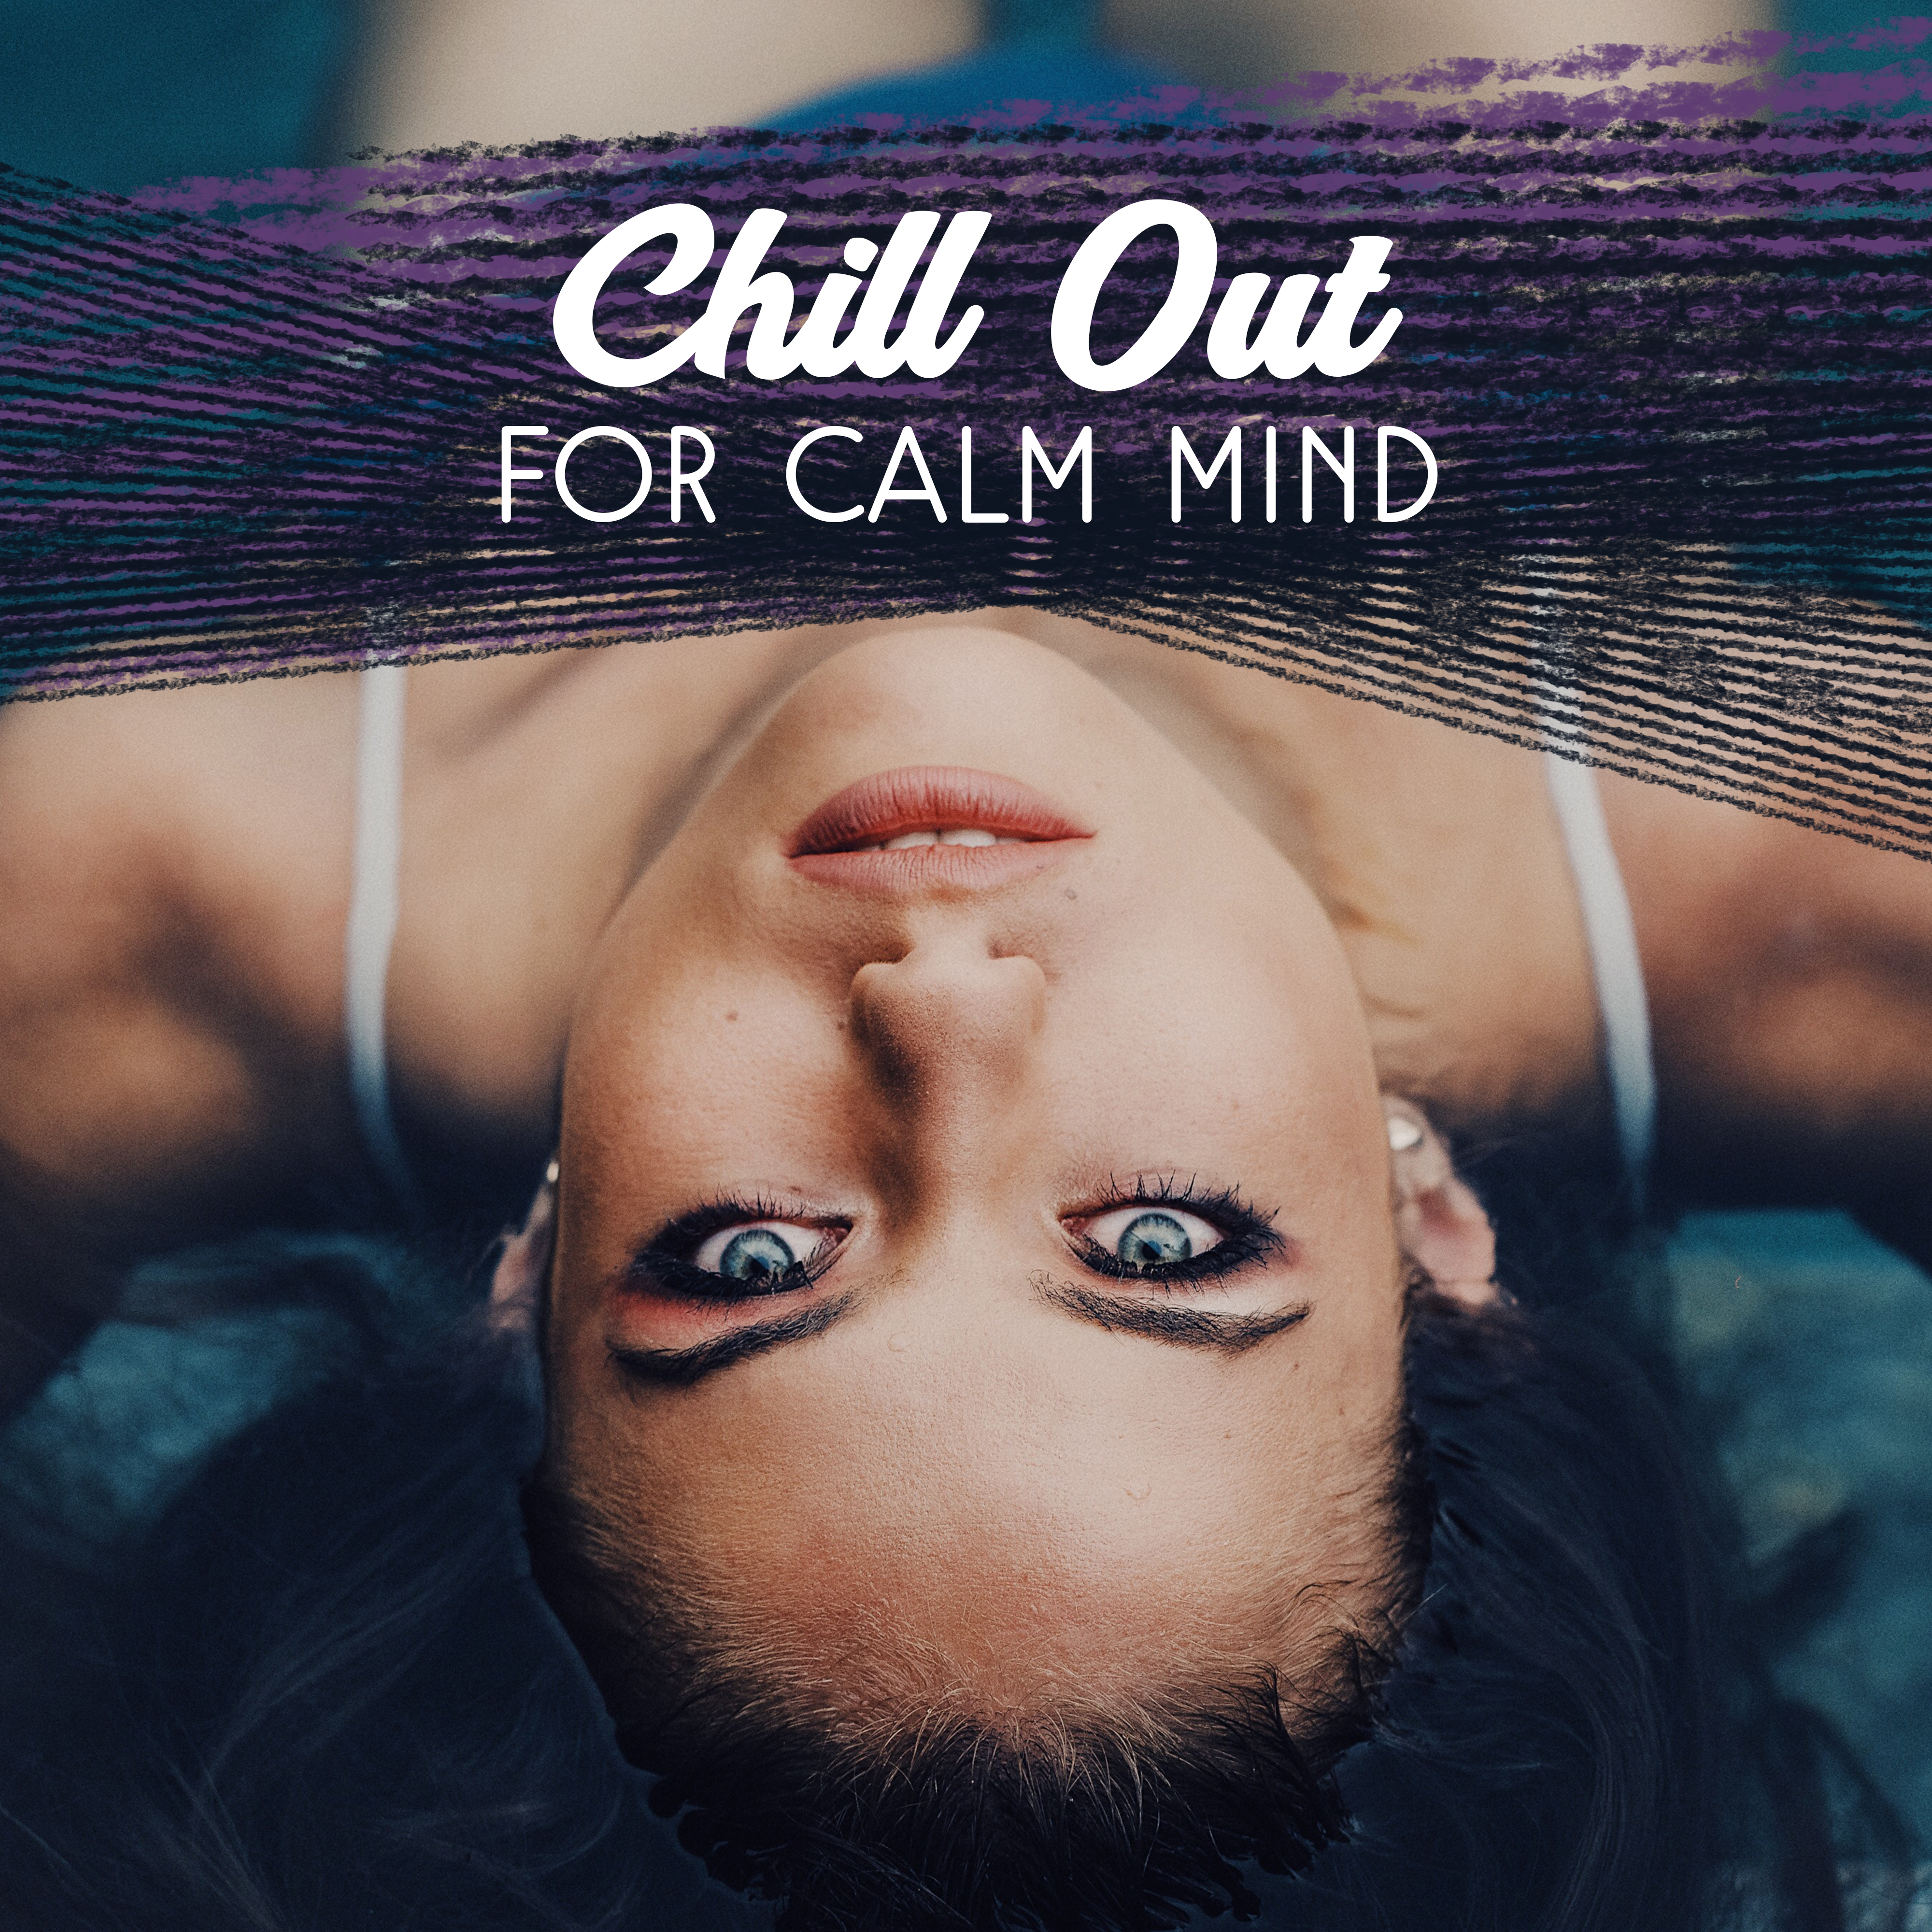 Chill Out for Calm Mind